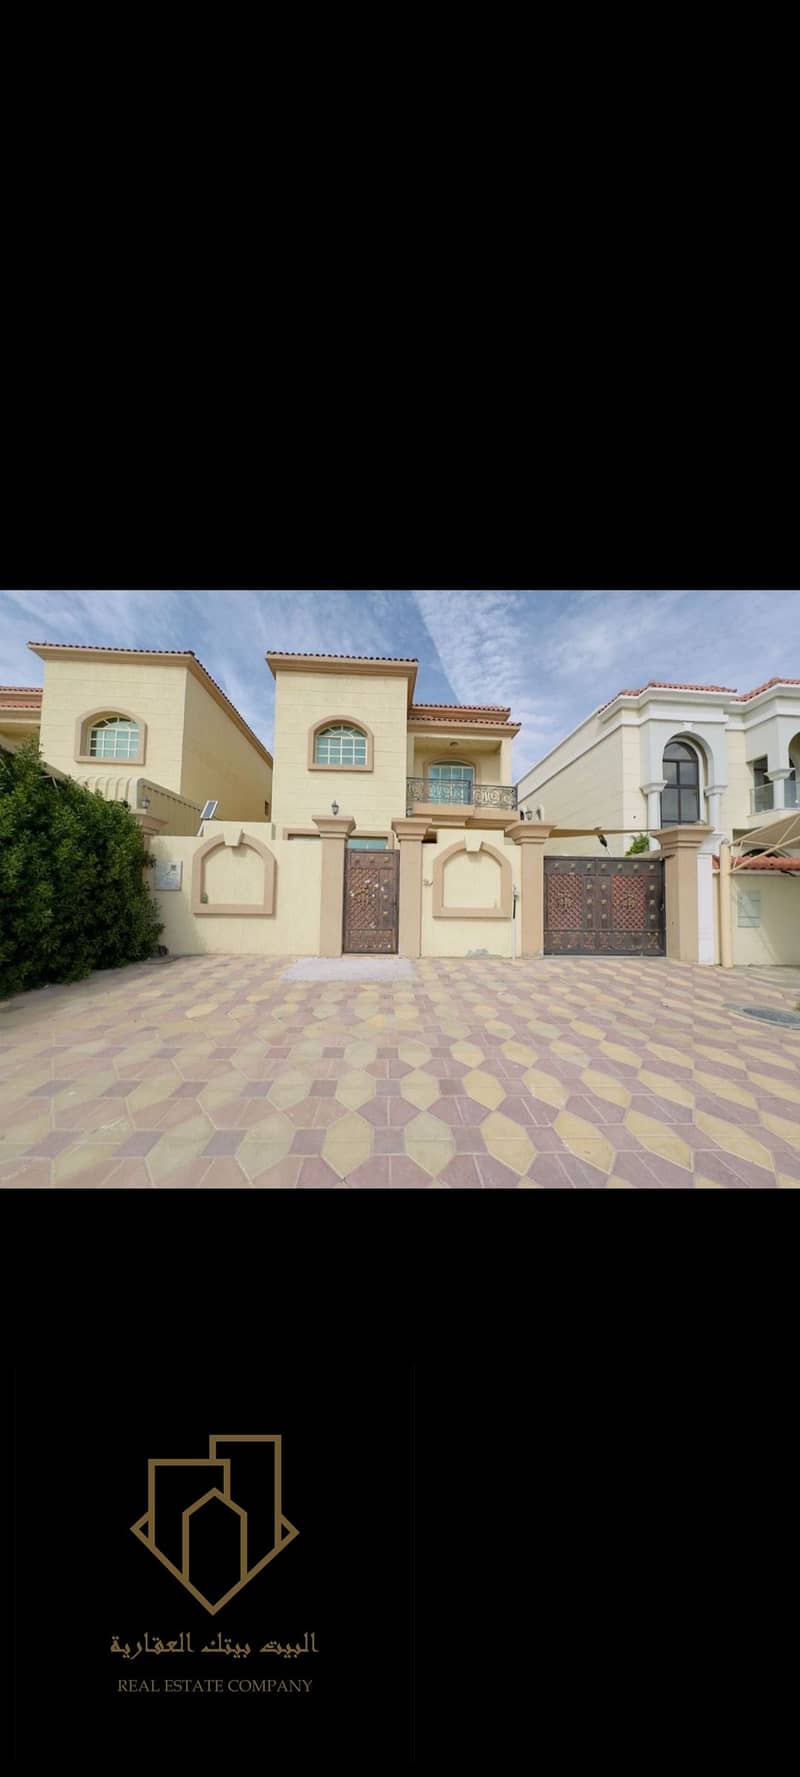 For lovers of sophistication and distinction, get a unique residential experience with this luxurious villa, characterized by an excellent area and excellent finishing, in the Al Mowaihat area. The villa features five master bedrooms, in addition to 2 liv